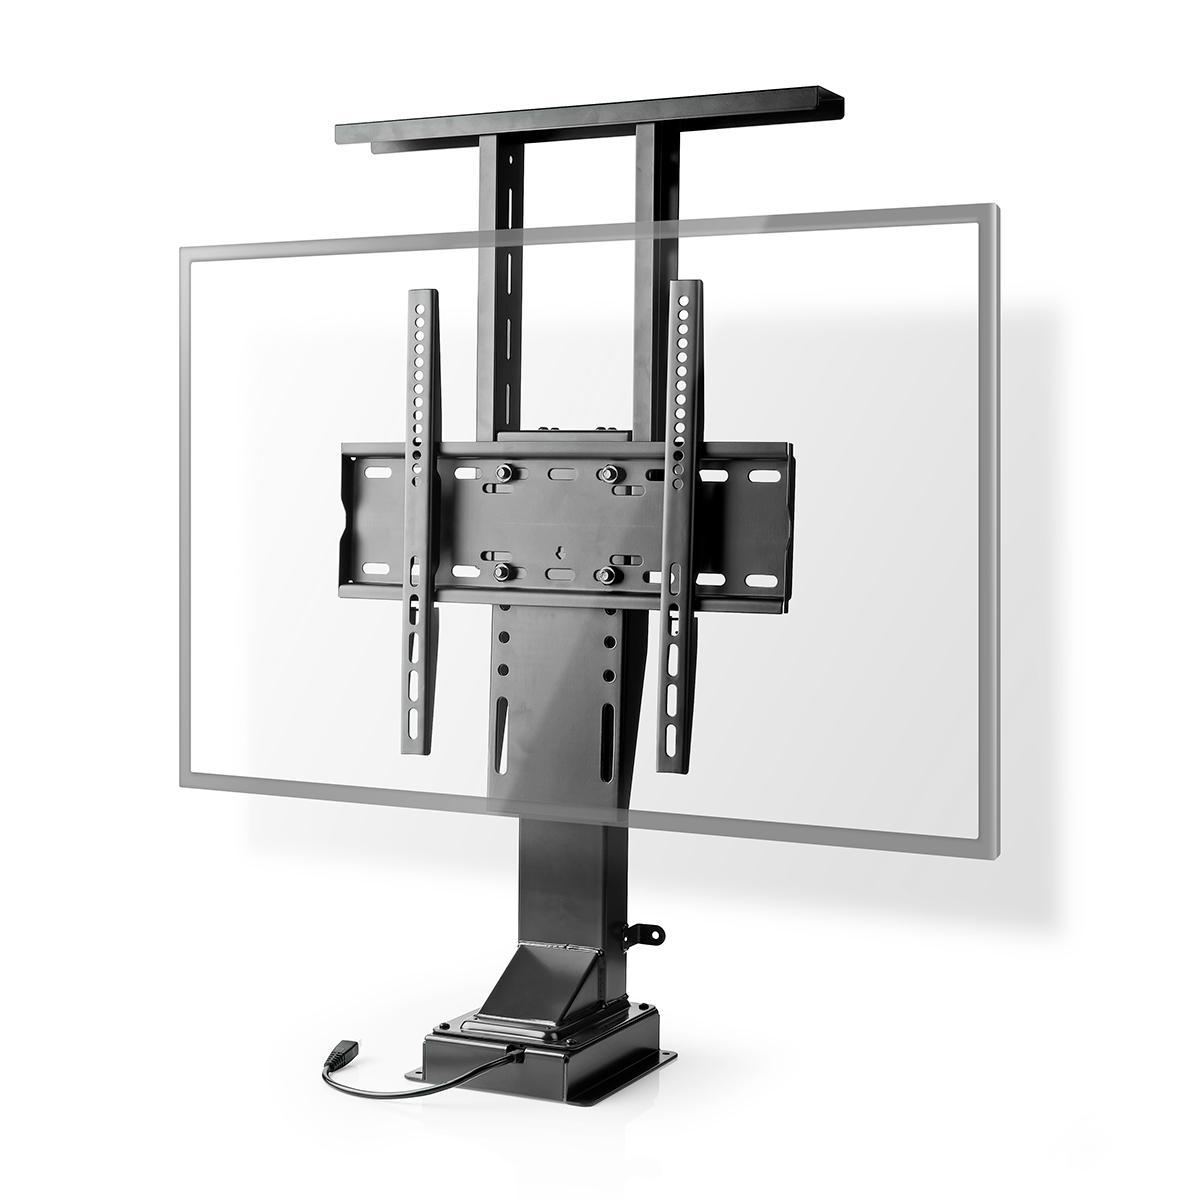 Motorised Tv Stand Vertical Motion Cabinet Assembly Up To 65